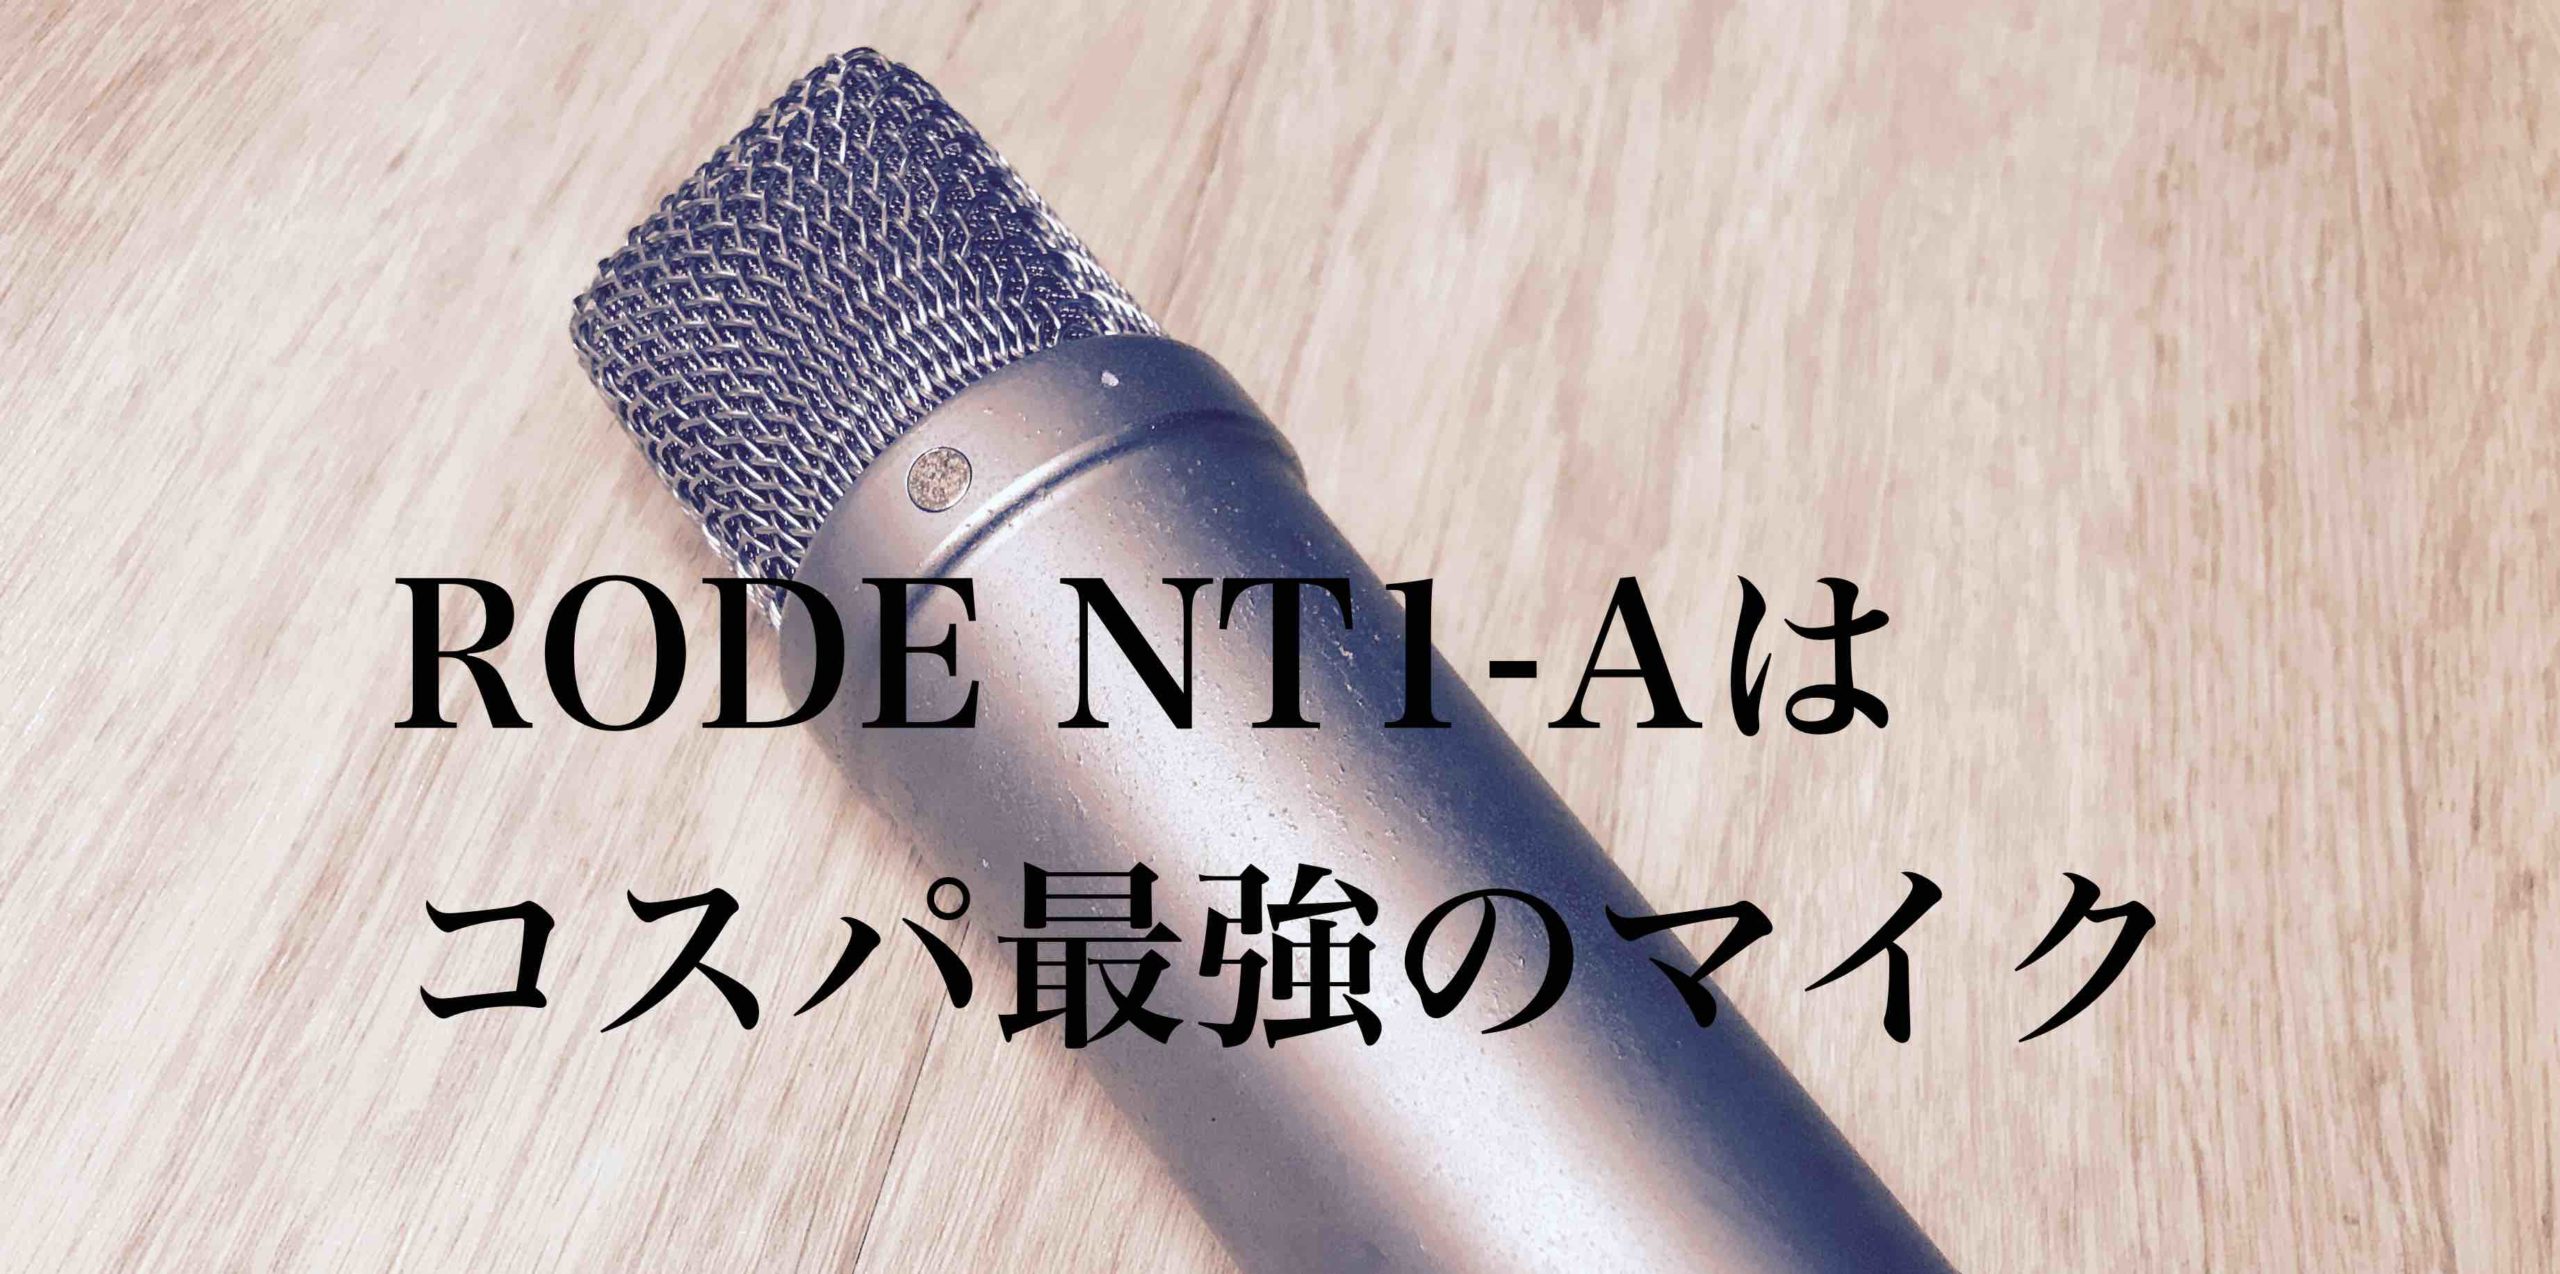 RODE NT1-A コンデンサーマイク www.krzysztofbialy.com